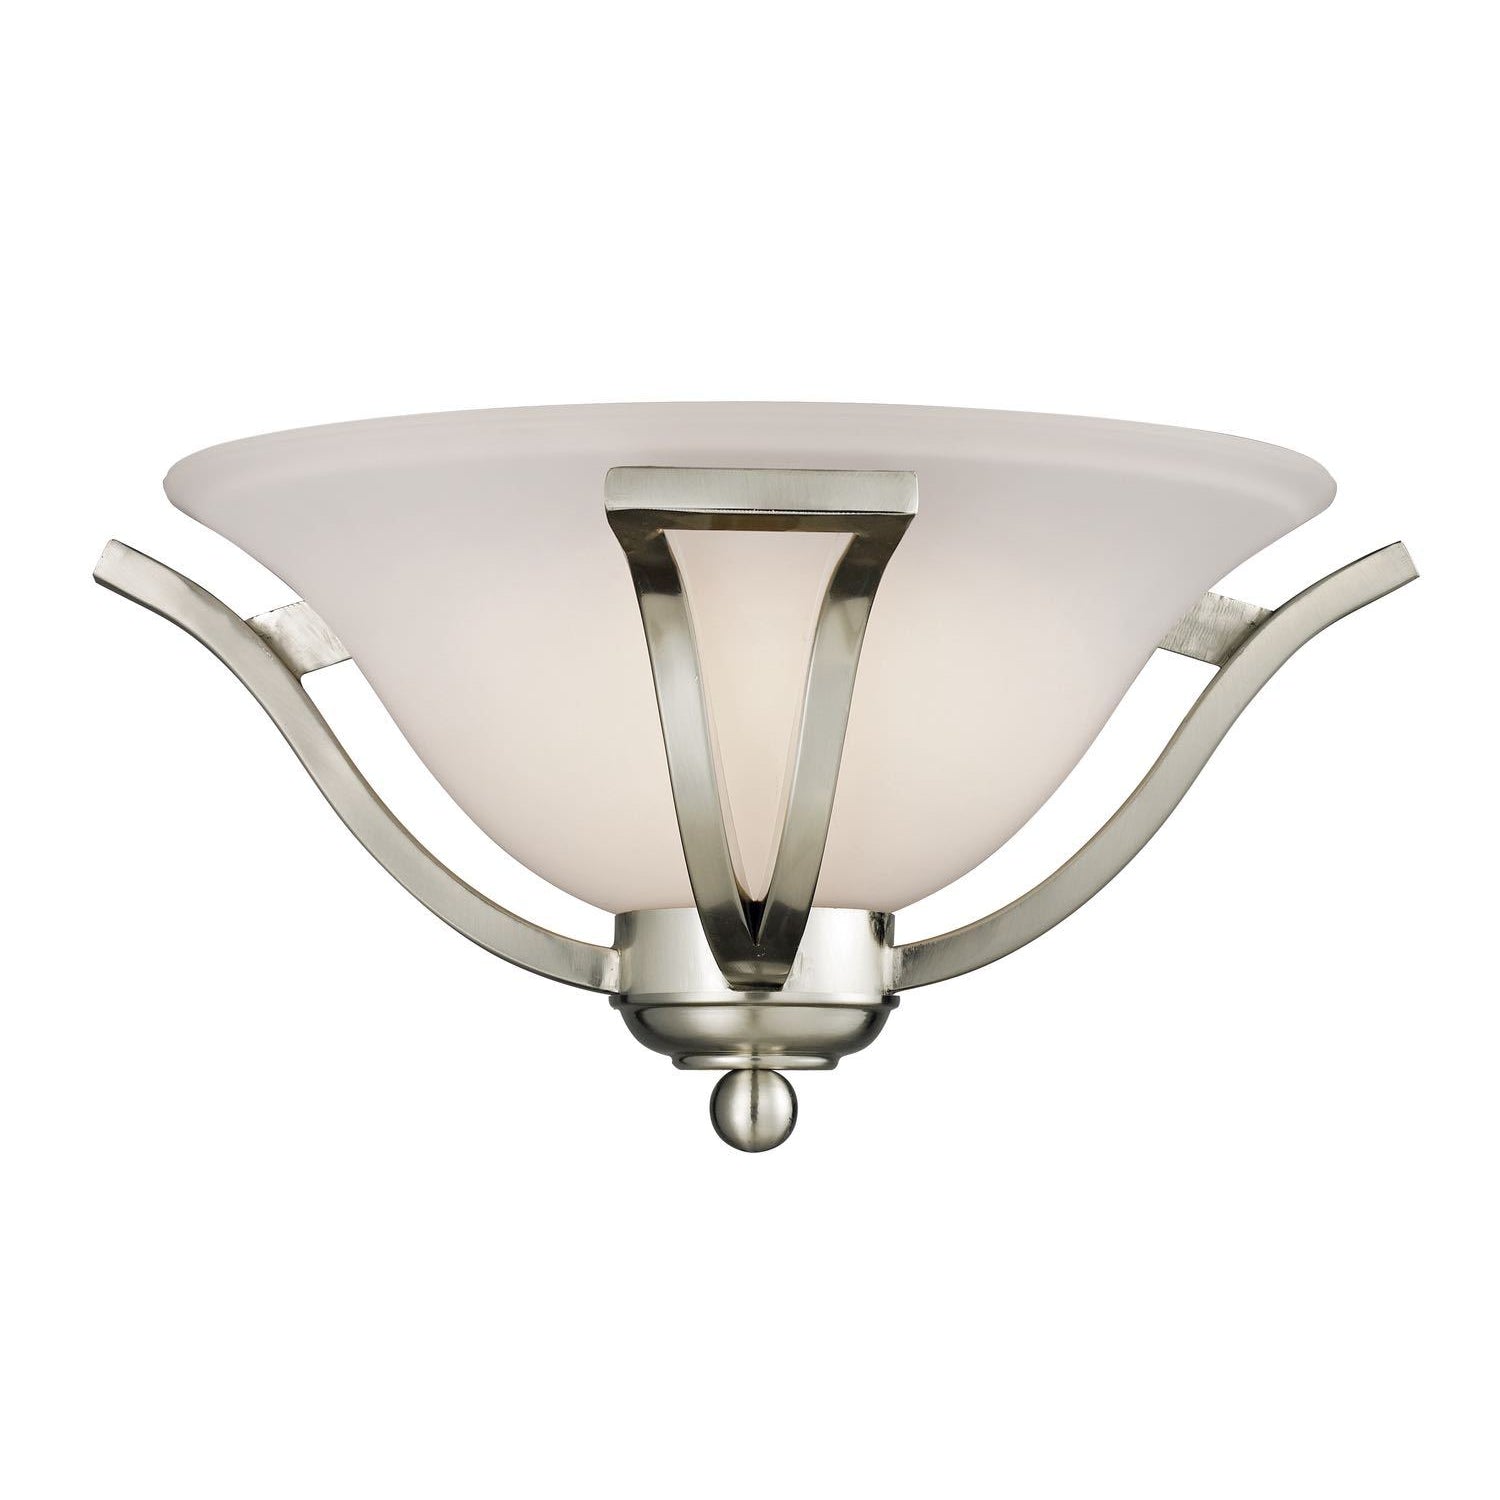 Lagoon Wall Sconce Brushed Nickel